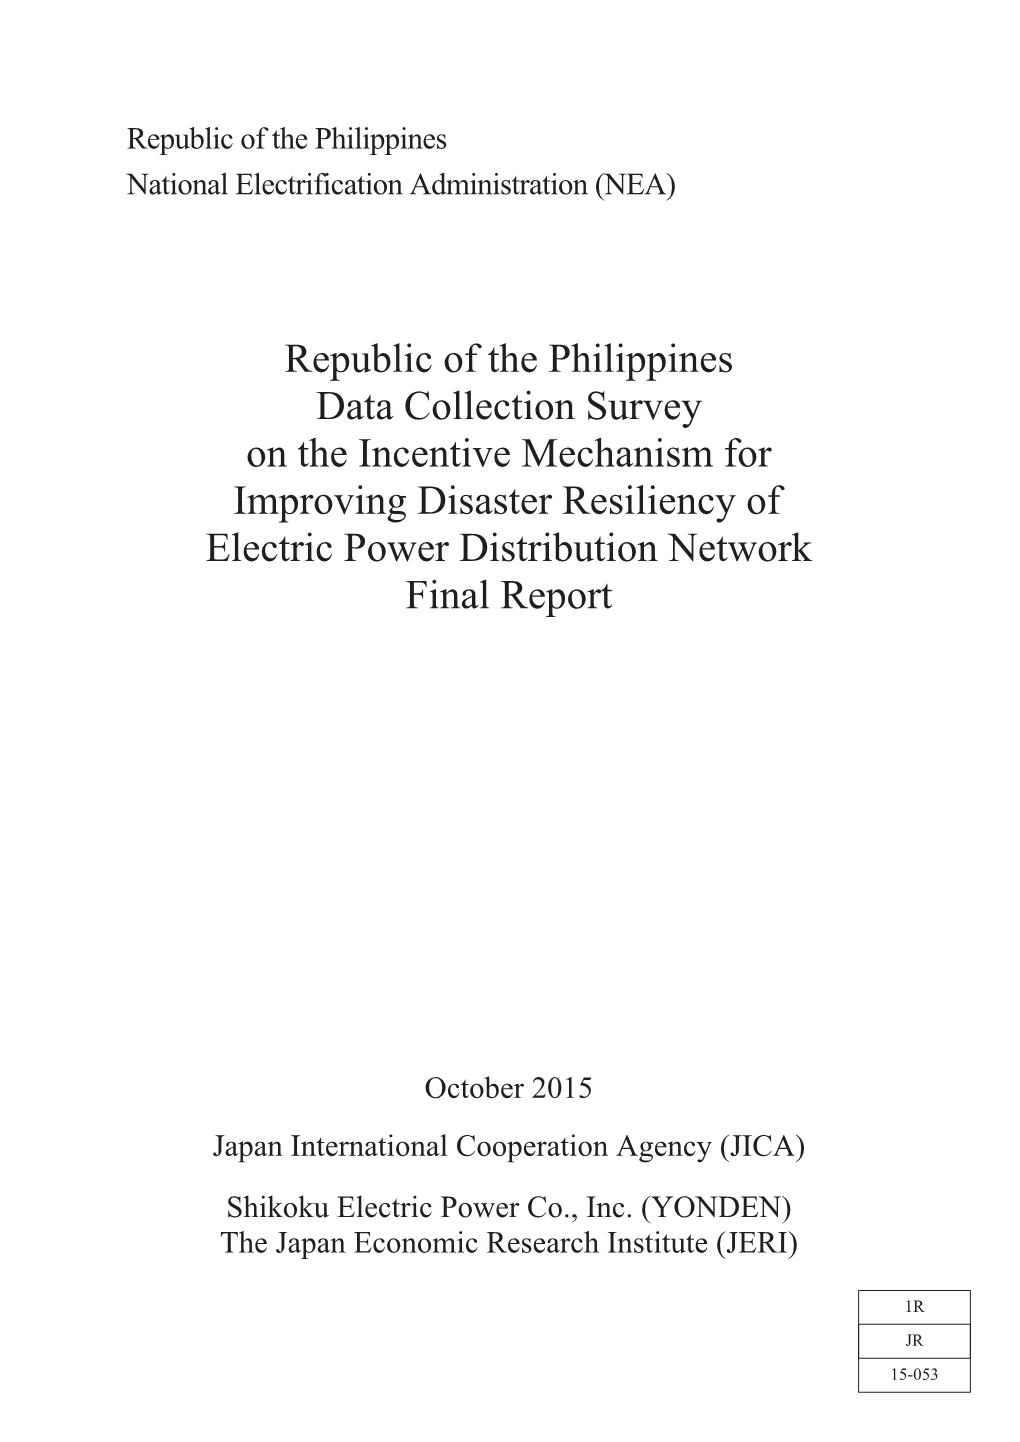 Republic of the Philippines Data Collection Survey on the Incentive Mechanism for Improving Disaster Resiliency of Electric Power Distribution Network Final Report